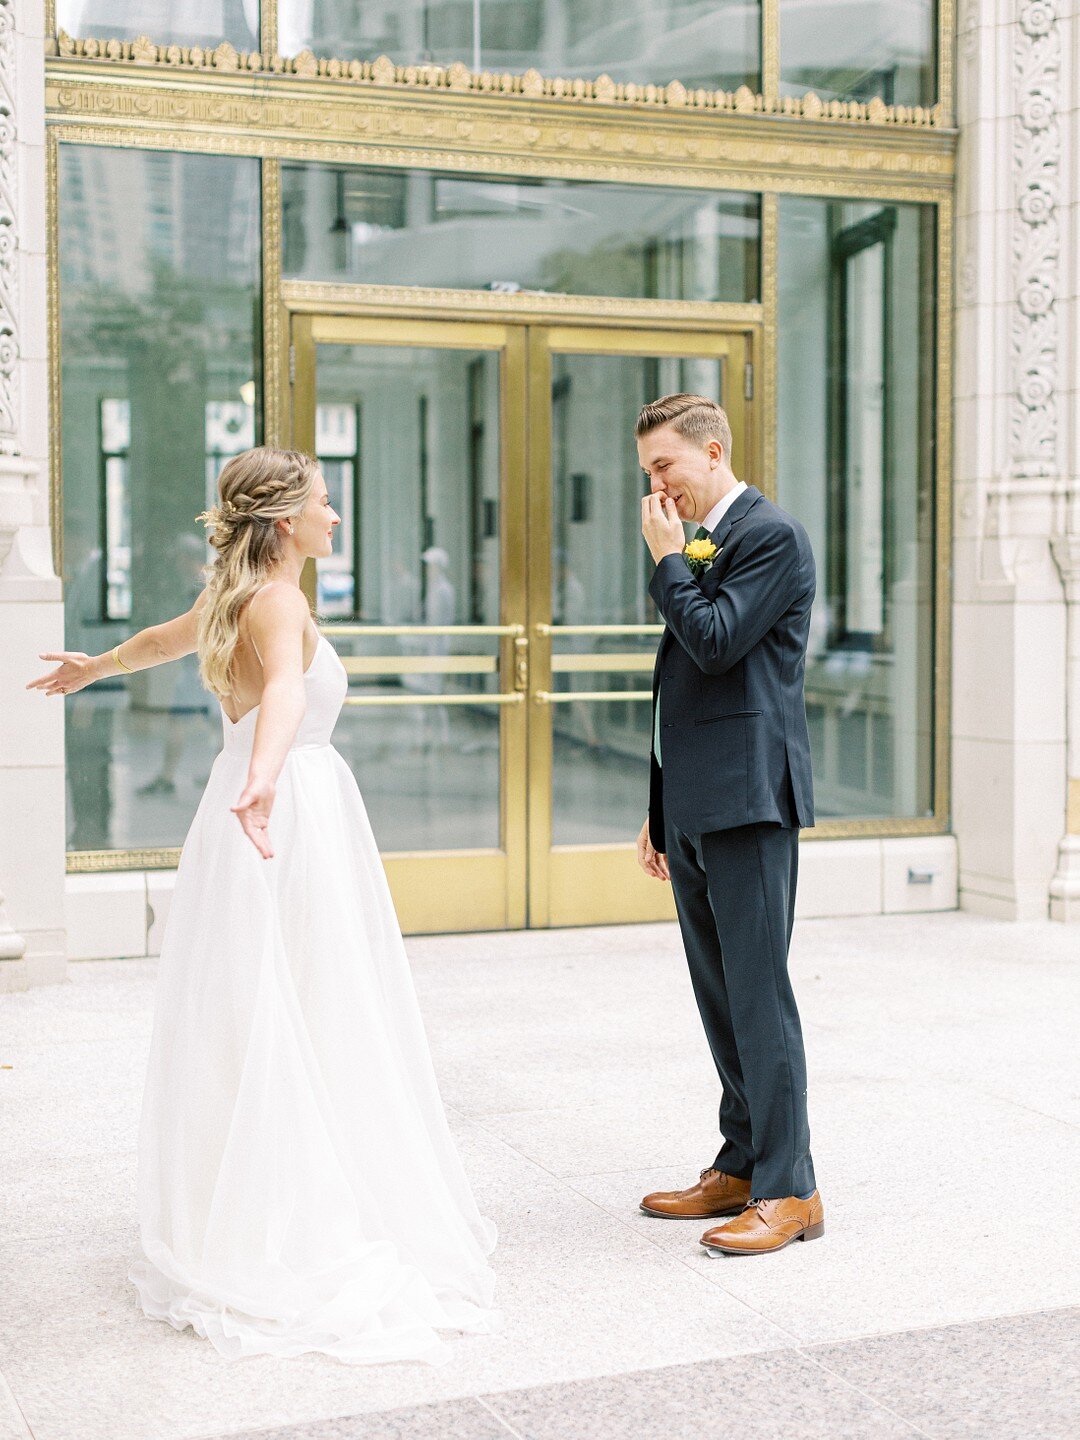 Romantic Cafe Brauer Wedding captured by Kaity Brawley Photography featured on CHI thee WED